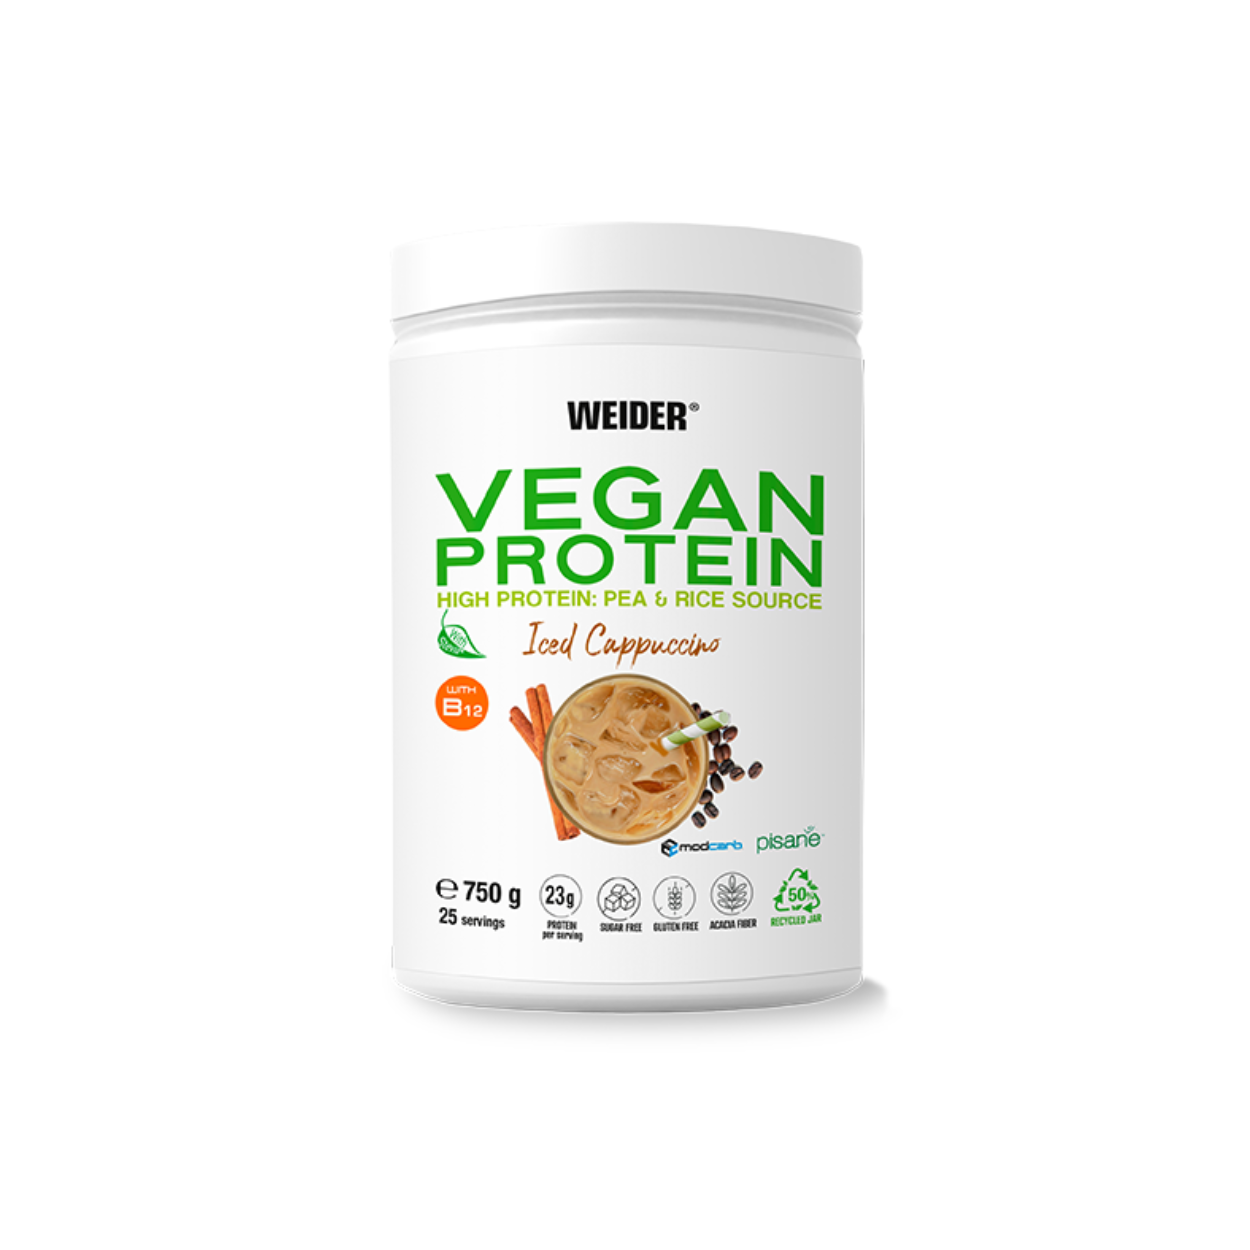 Weider Vegan Protein Iced Cappuccino (750g Dose)